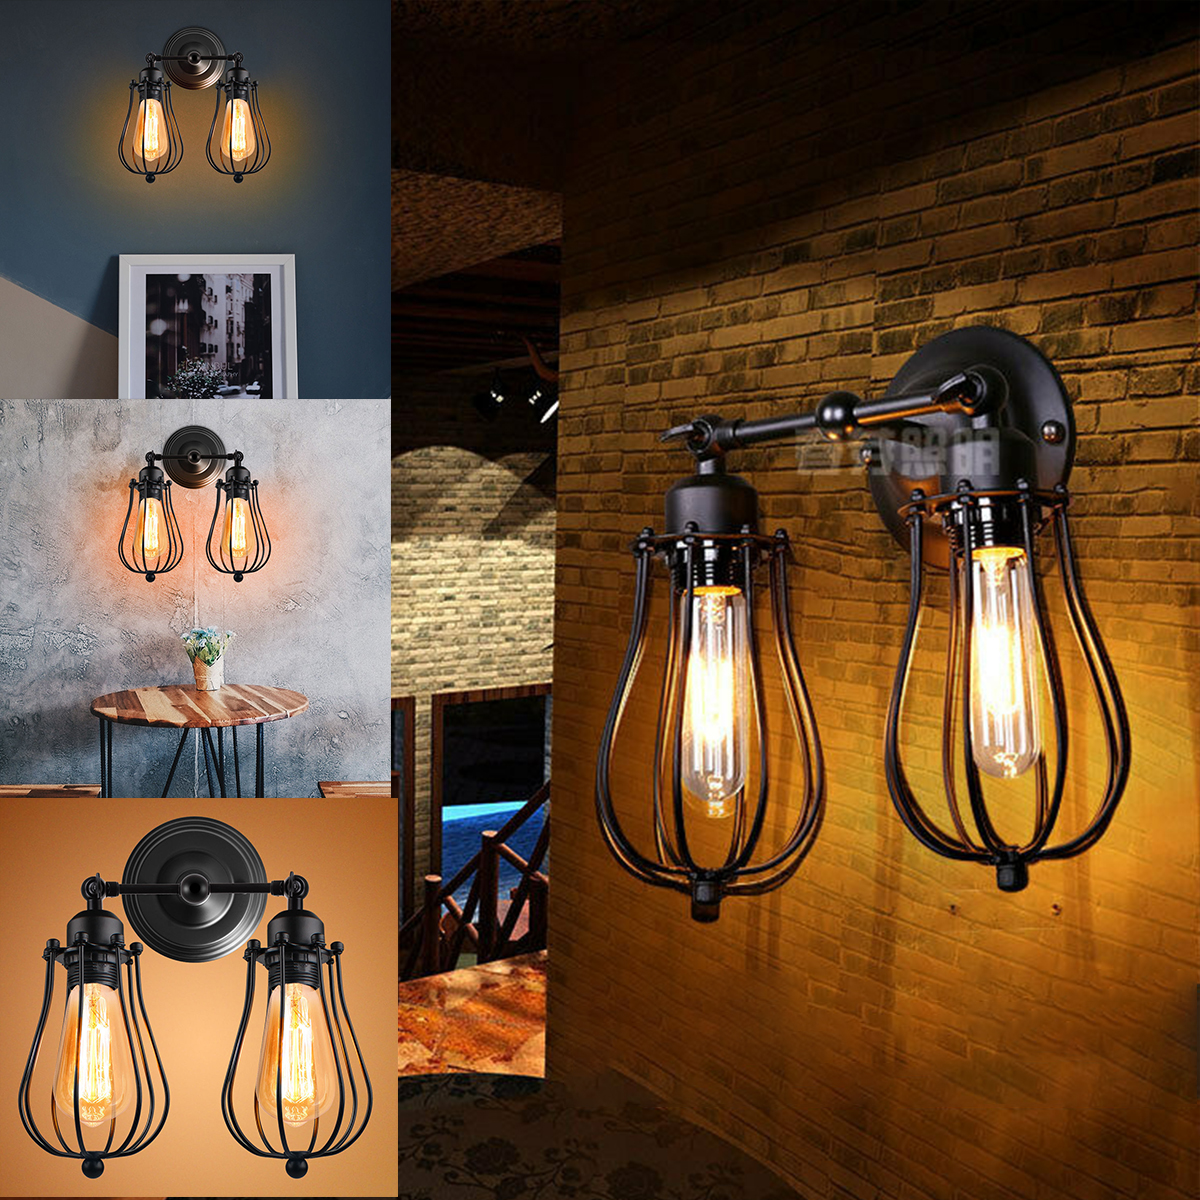 ZMH Vintage Wall Light Indoor Wood and Glass Retro Wall lamp E27 Industrial Wall Lighting Rustic Lamp for Hallway Country Bedroom Living Room Dining Table 